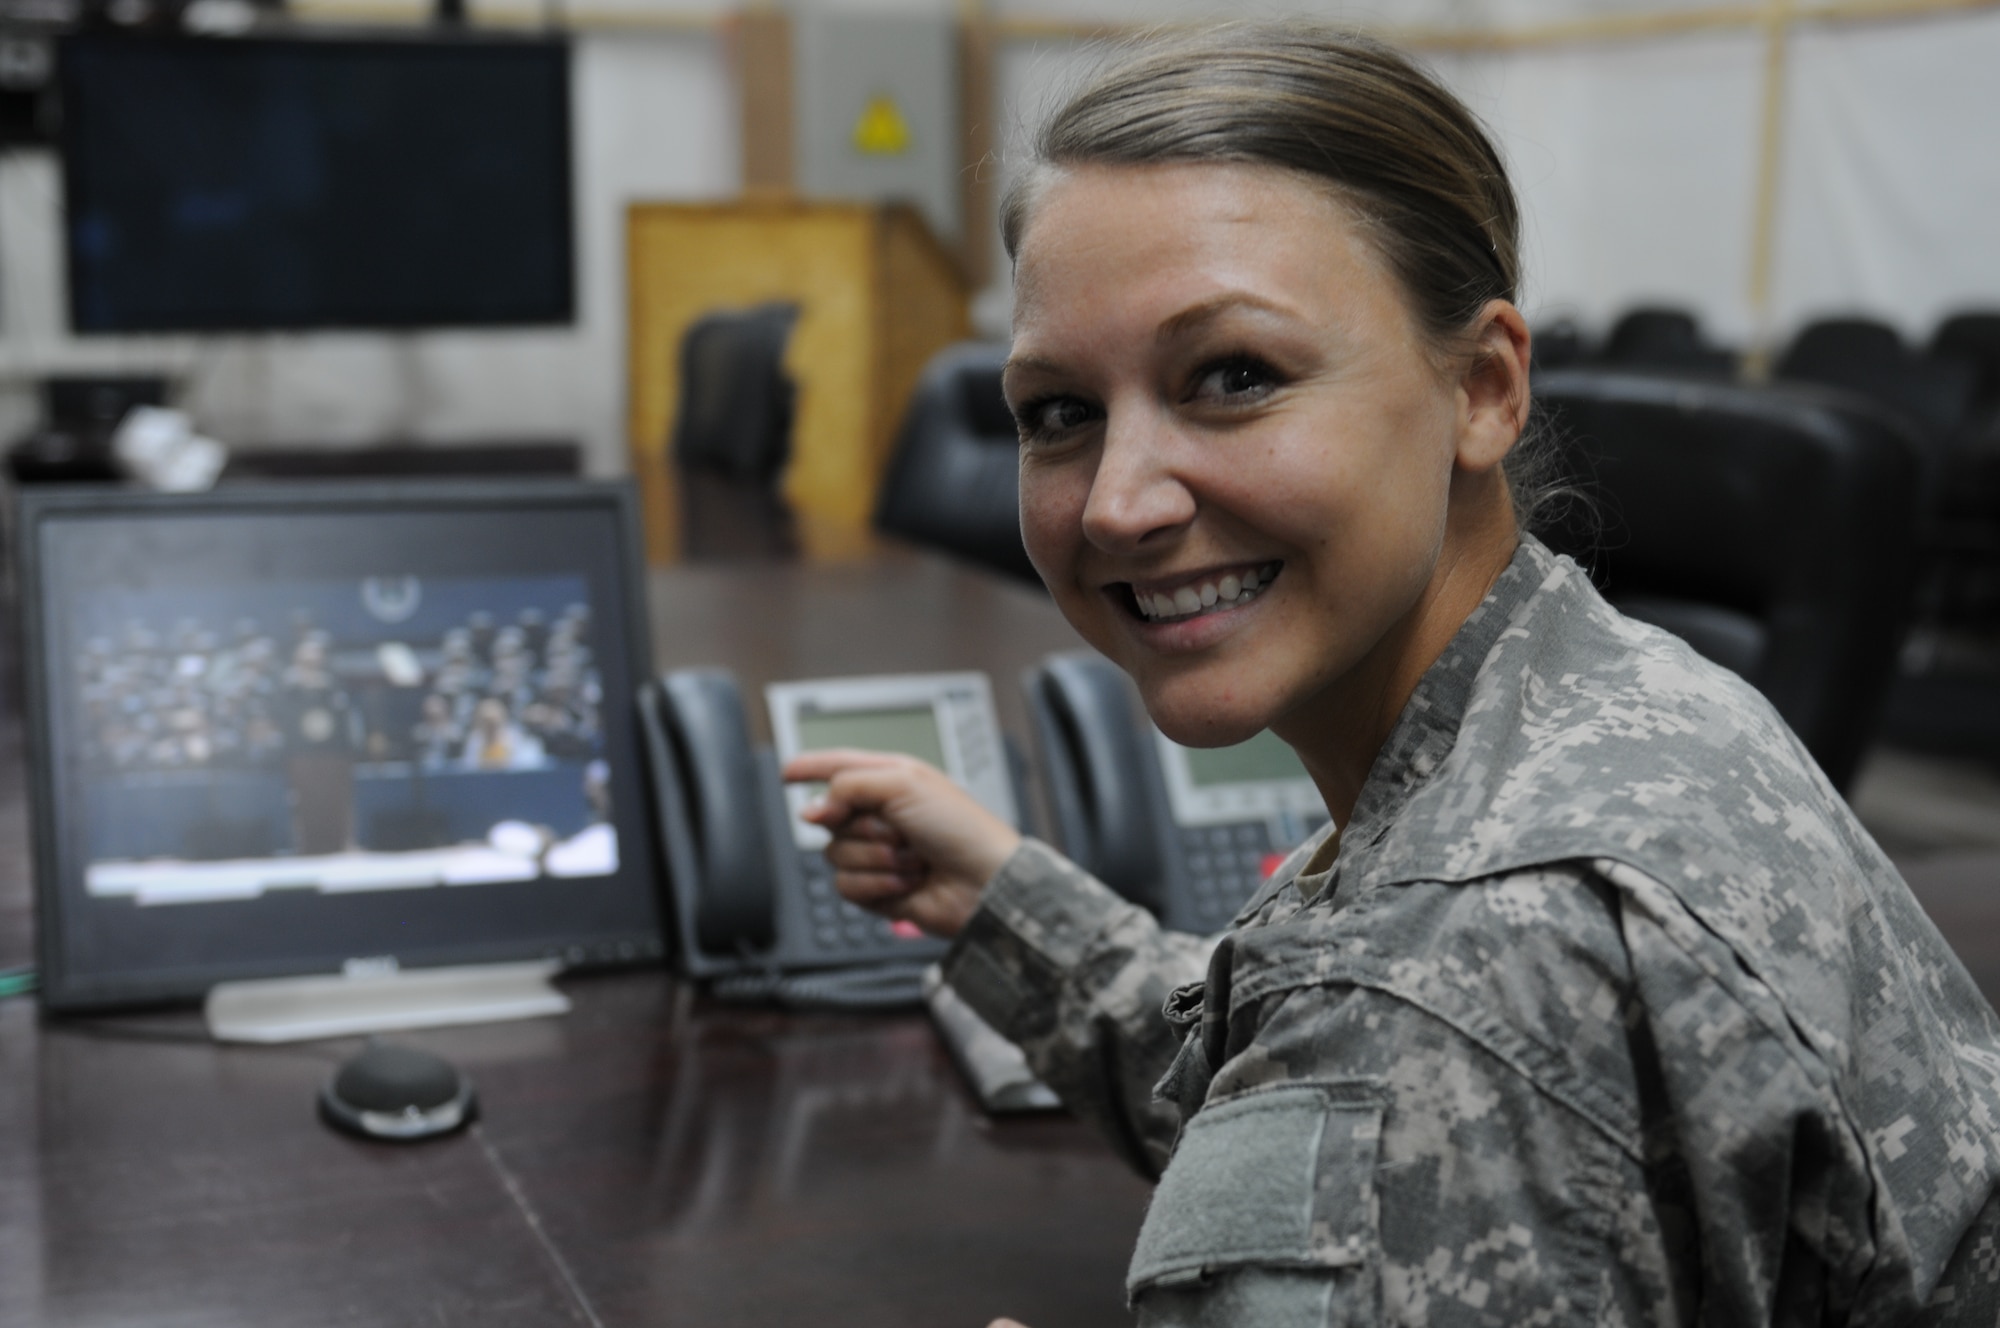 Capt. Brooke Jones watches a live stream of the U.S. Air Force Academy Graduation Ceremony May 28, 2014, from a conference room in Kuwait. Her younger brother, 2nd Lt. Blake Jones, graduated that day with the Class of 2014. (Courtesy Photo) 